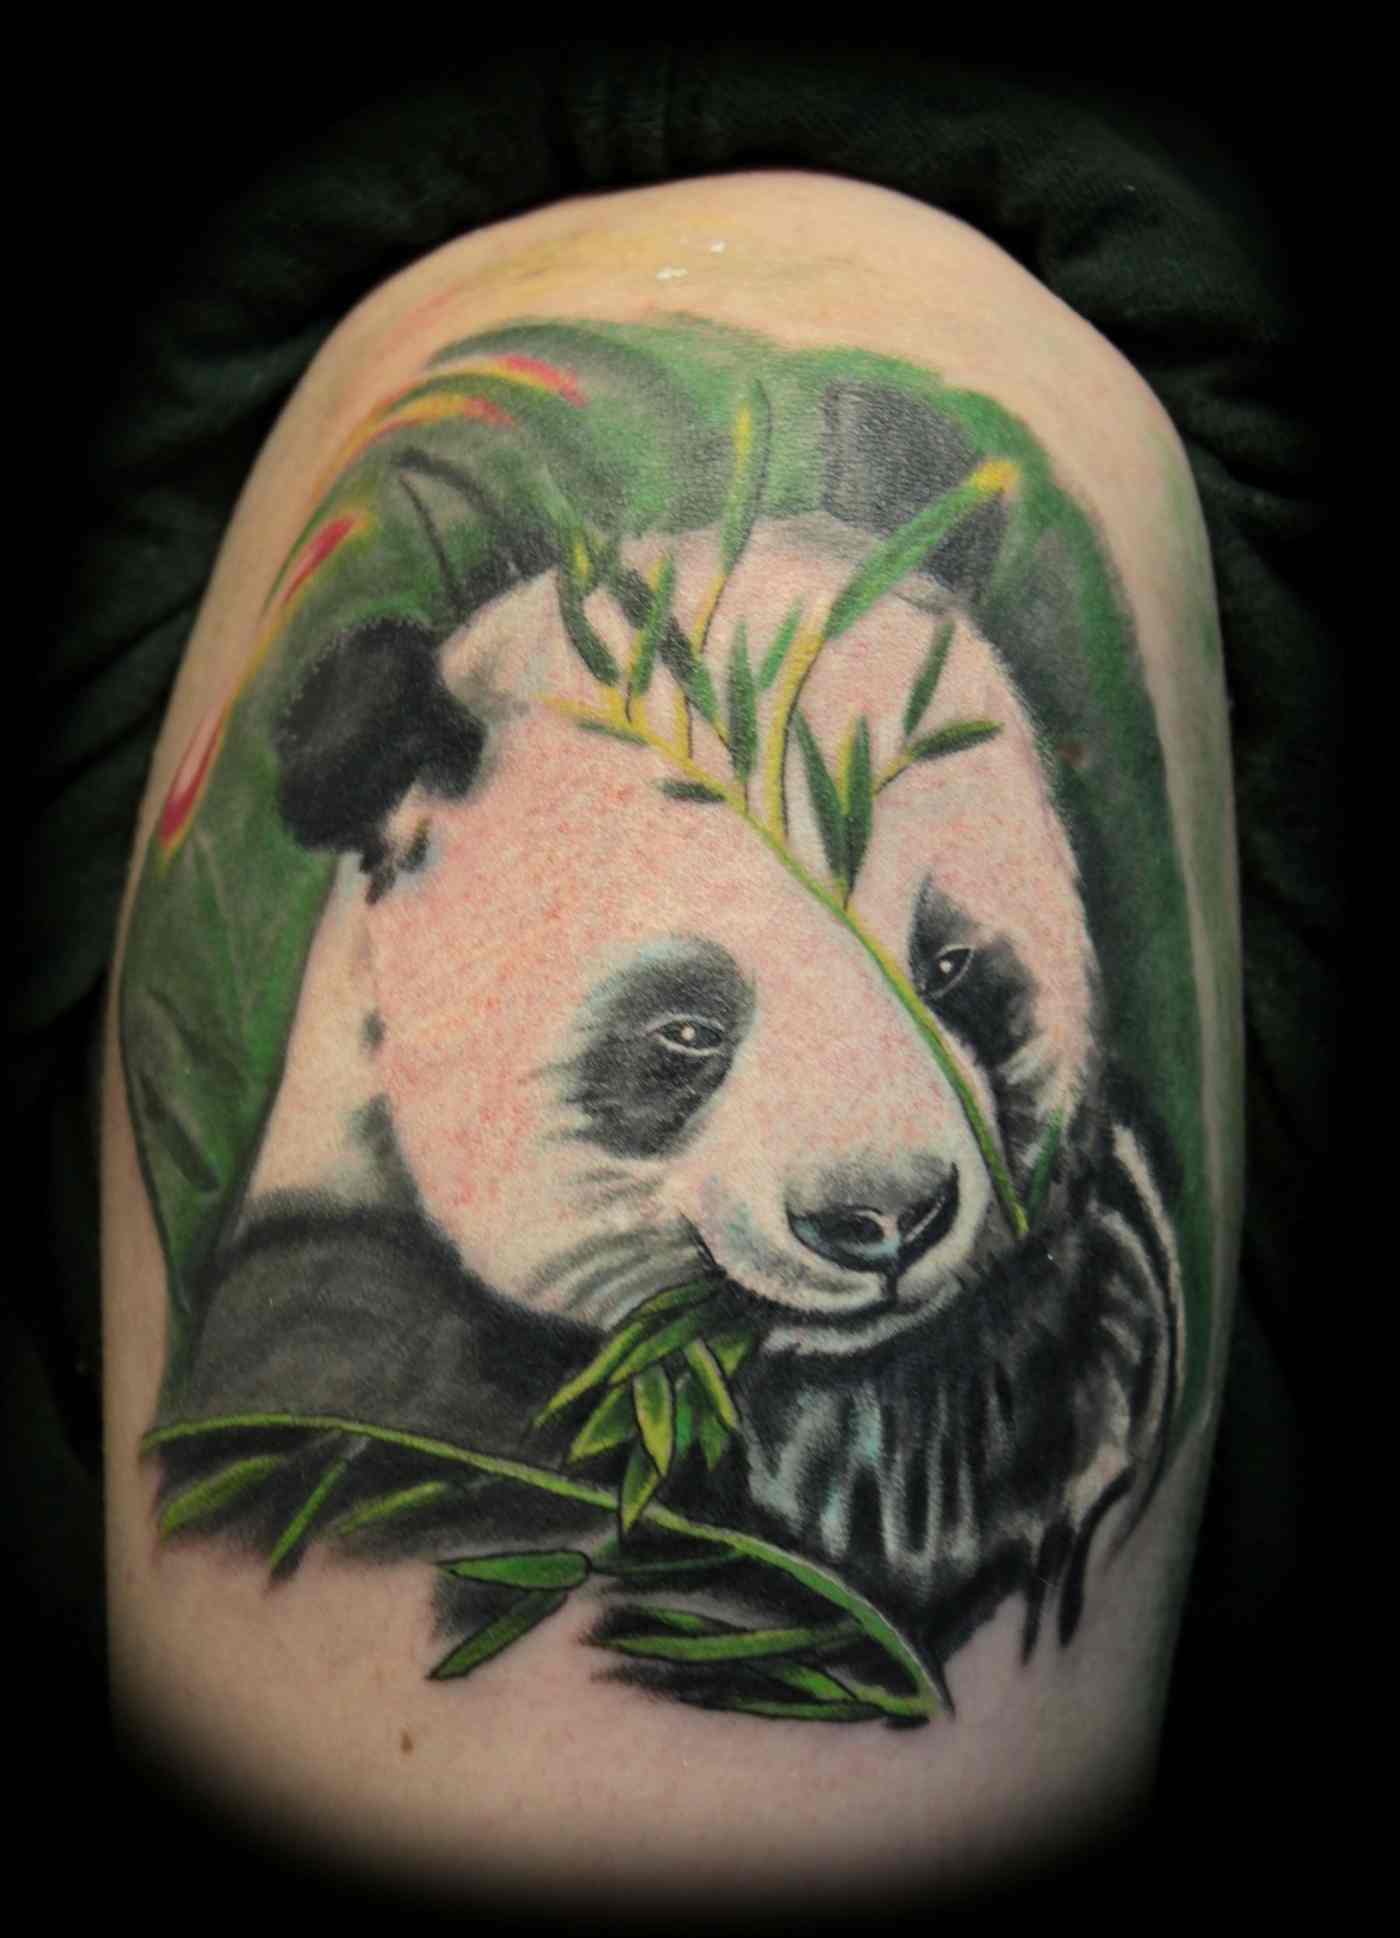 Combine the white panda with bamboo for a green tattoo